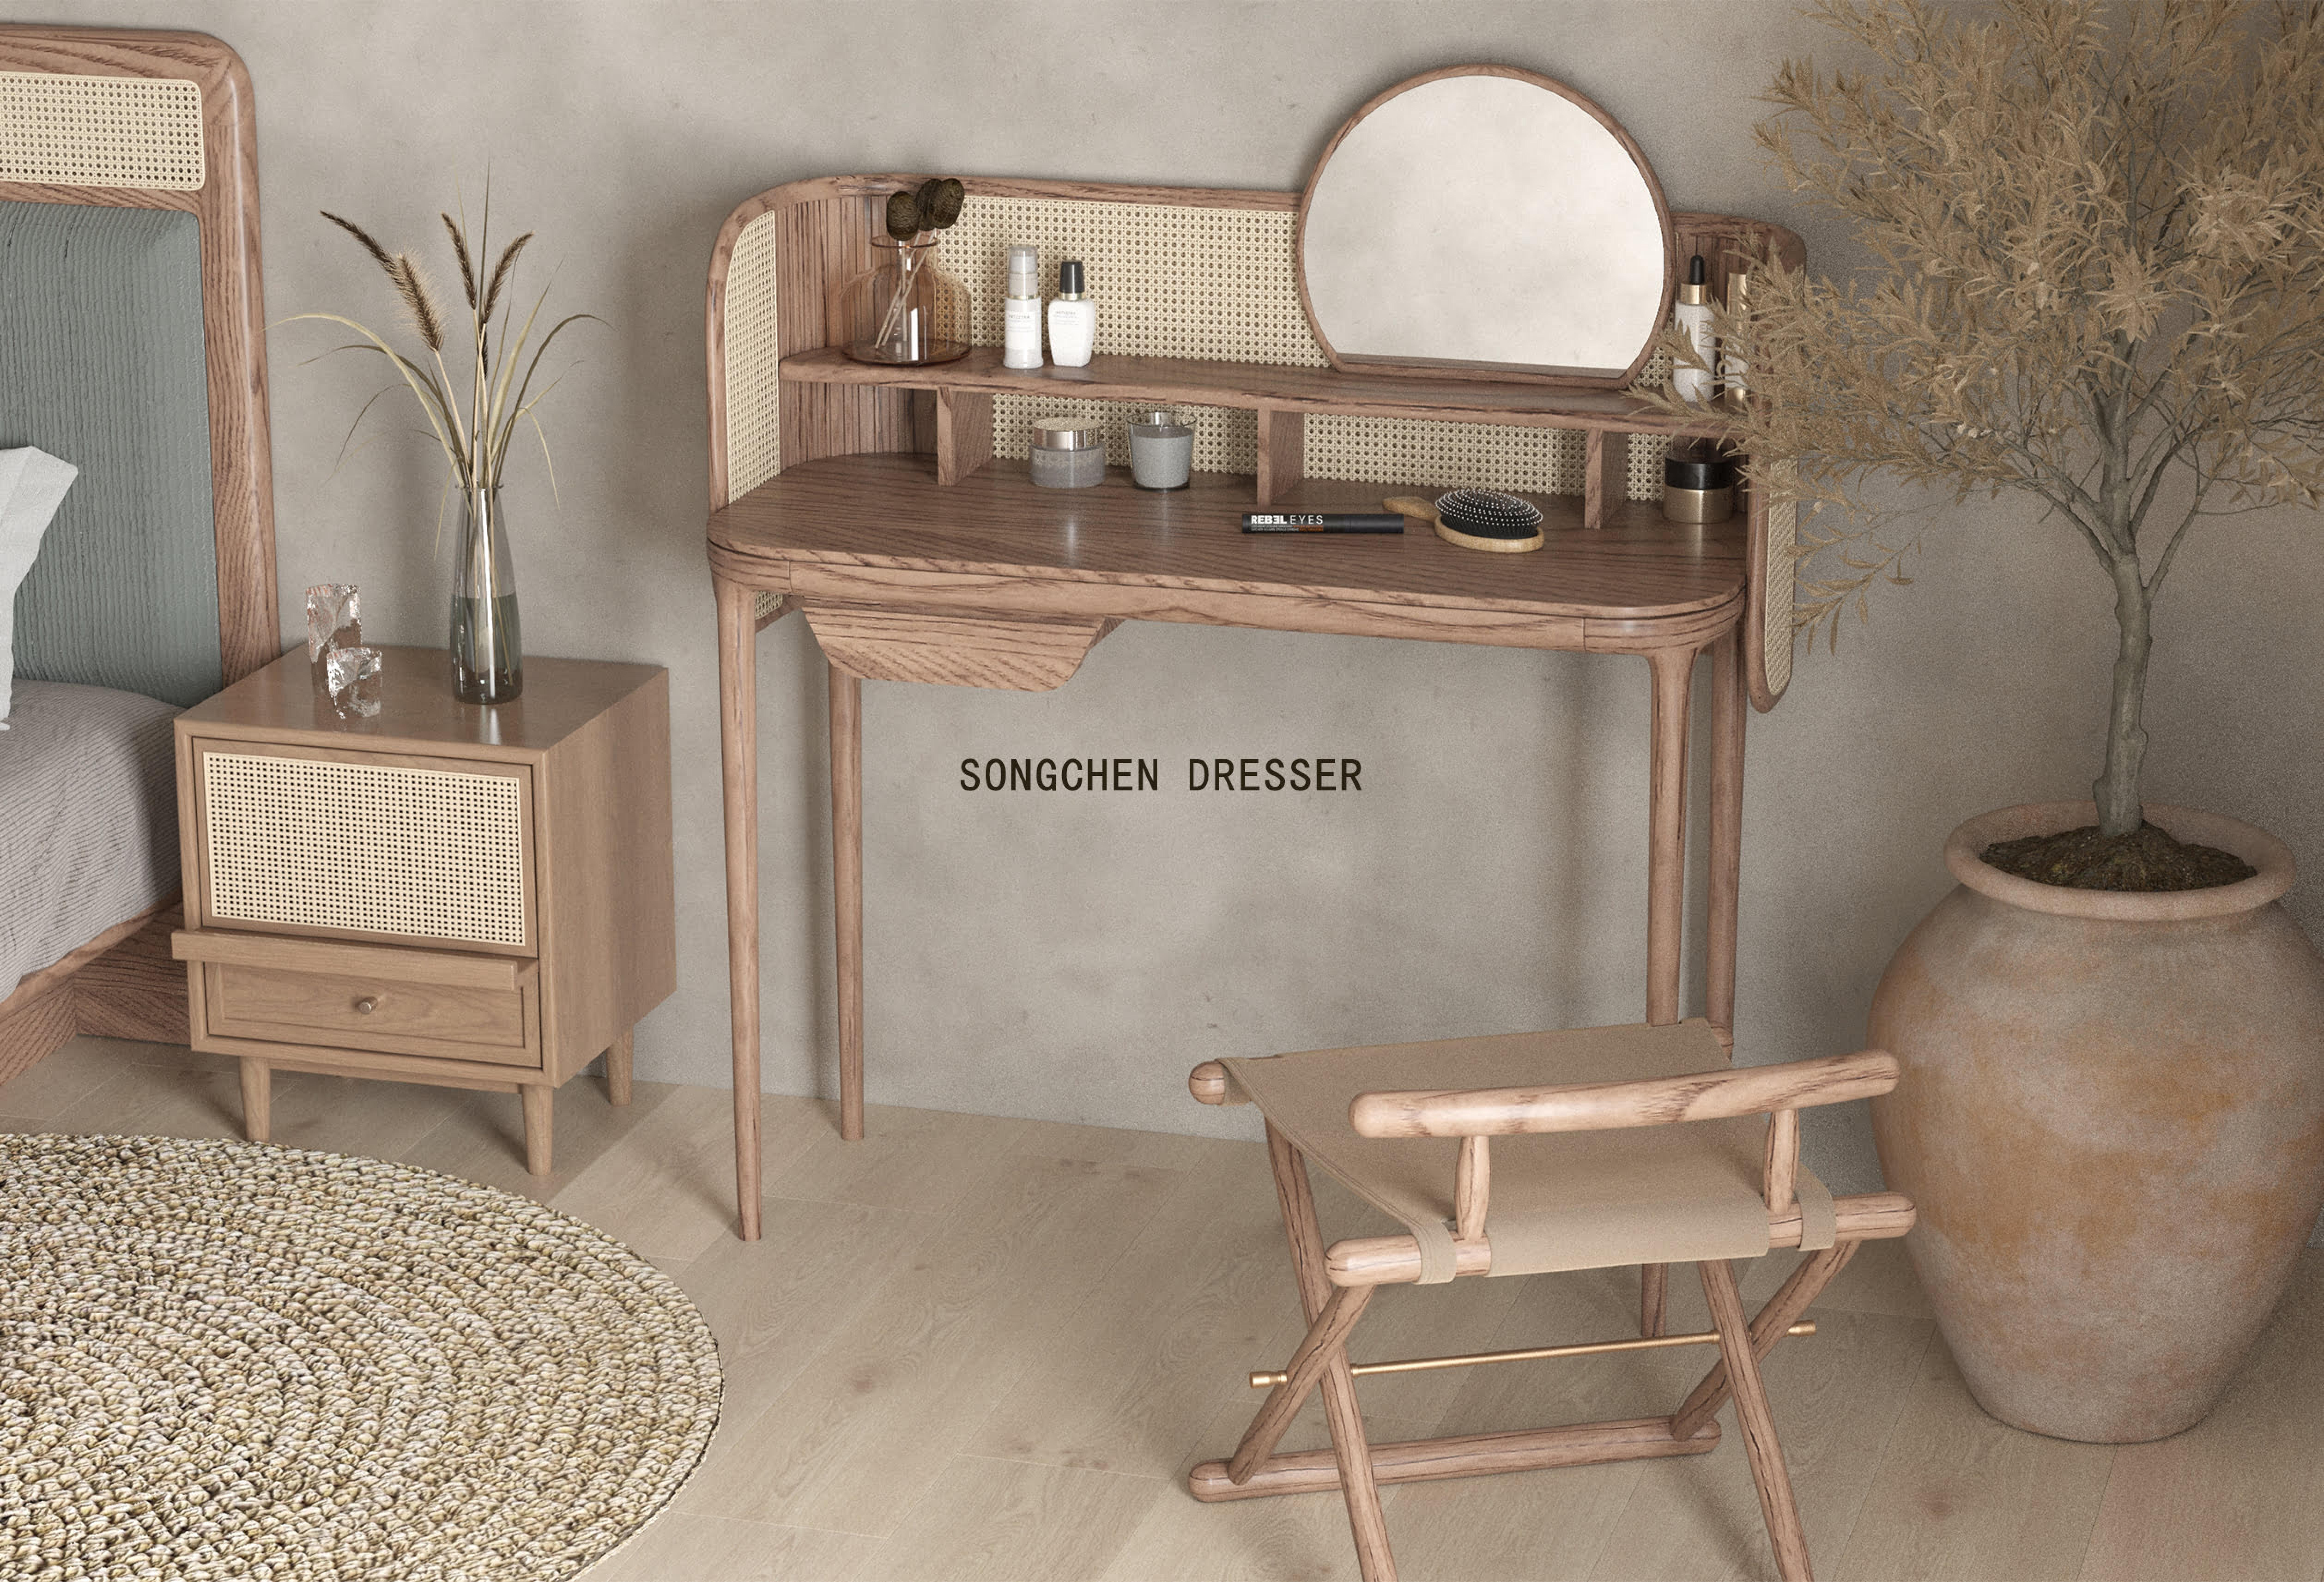 TBG-W01 dressing table and chair set dresser with mirror  modern solid wood rattan bedroom furniture  dressing table chair set ins bedroom furniture,dresser with mirror,dressing table and chairs,makeup desk,makeup table set